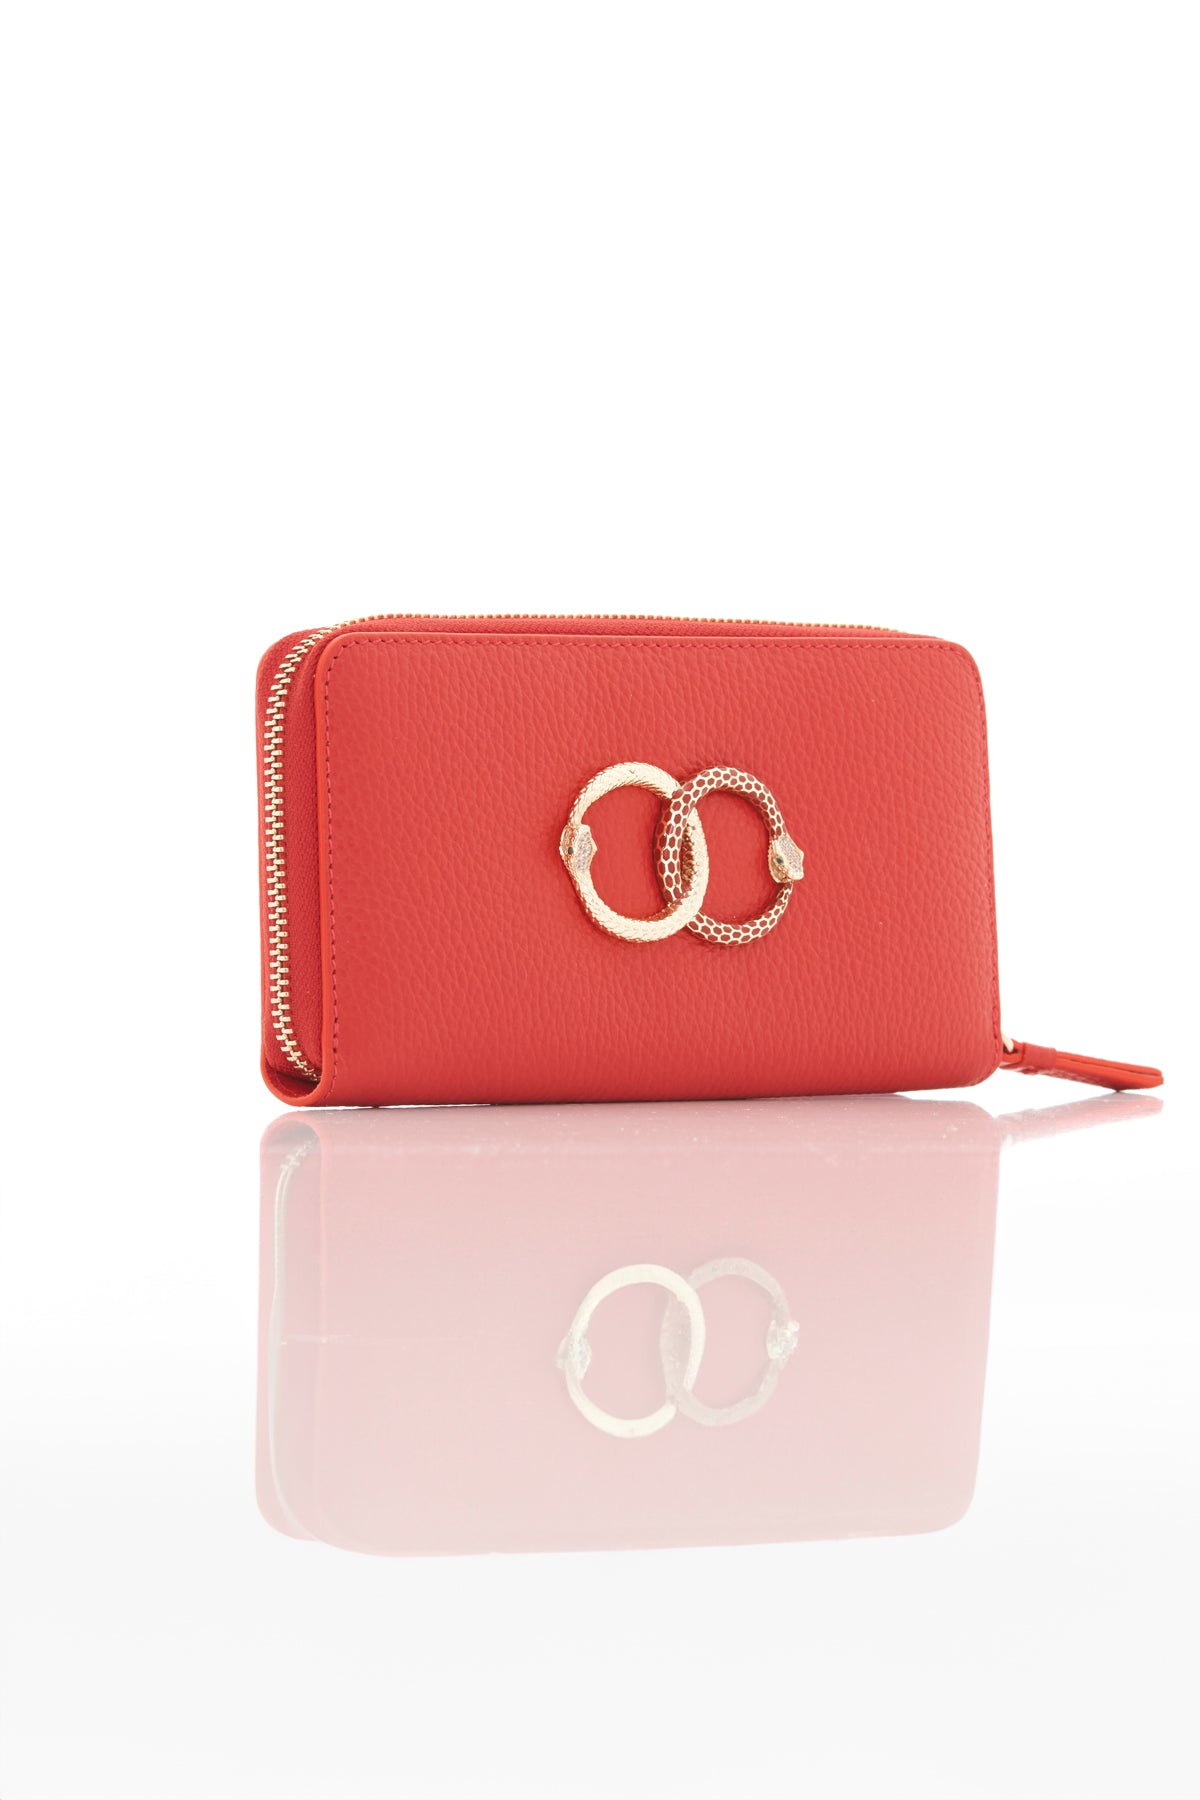 red ouroboros genuine leather women's wallet side